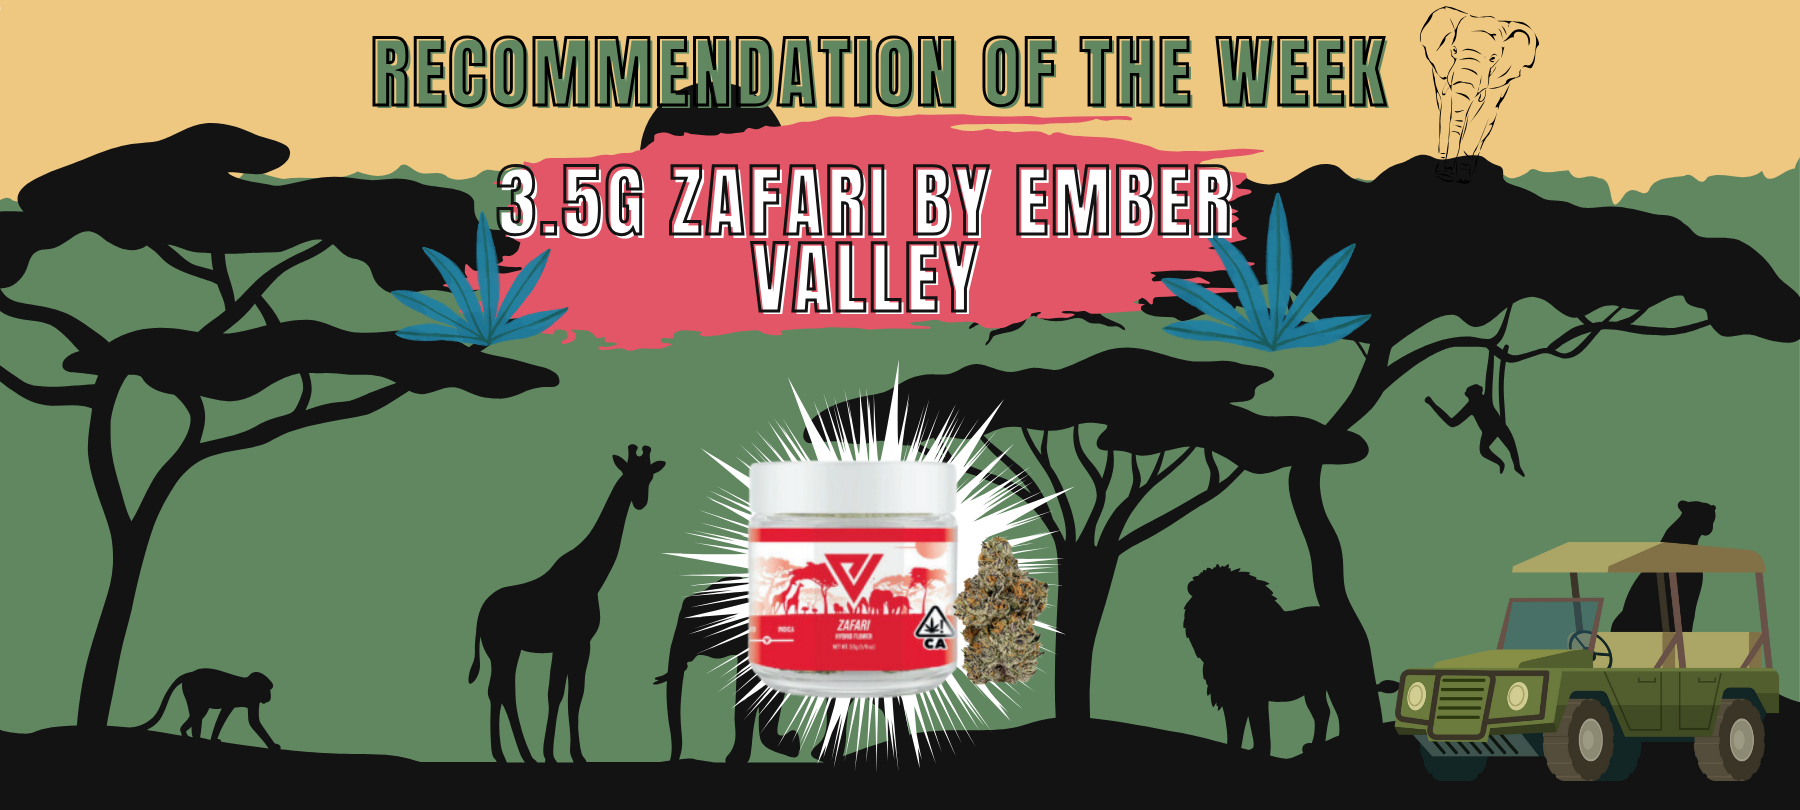 Recommendation of the Week: Zafari by Ember Valley